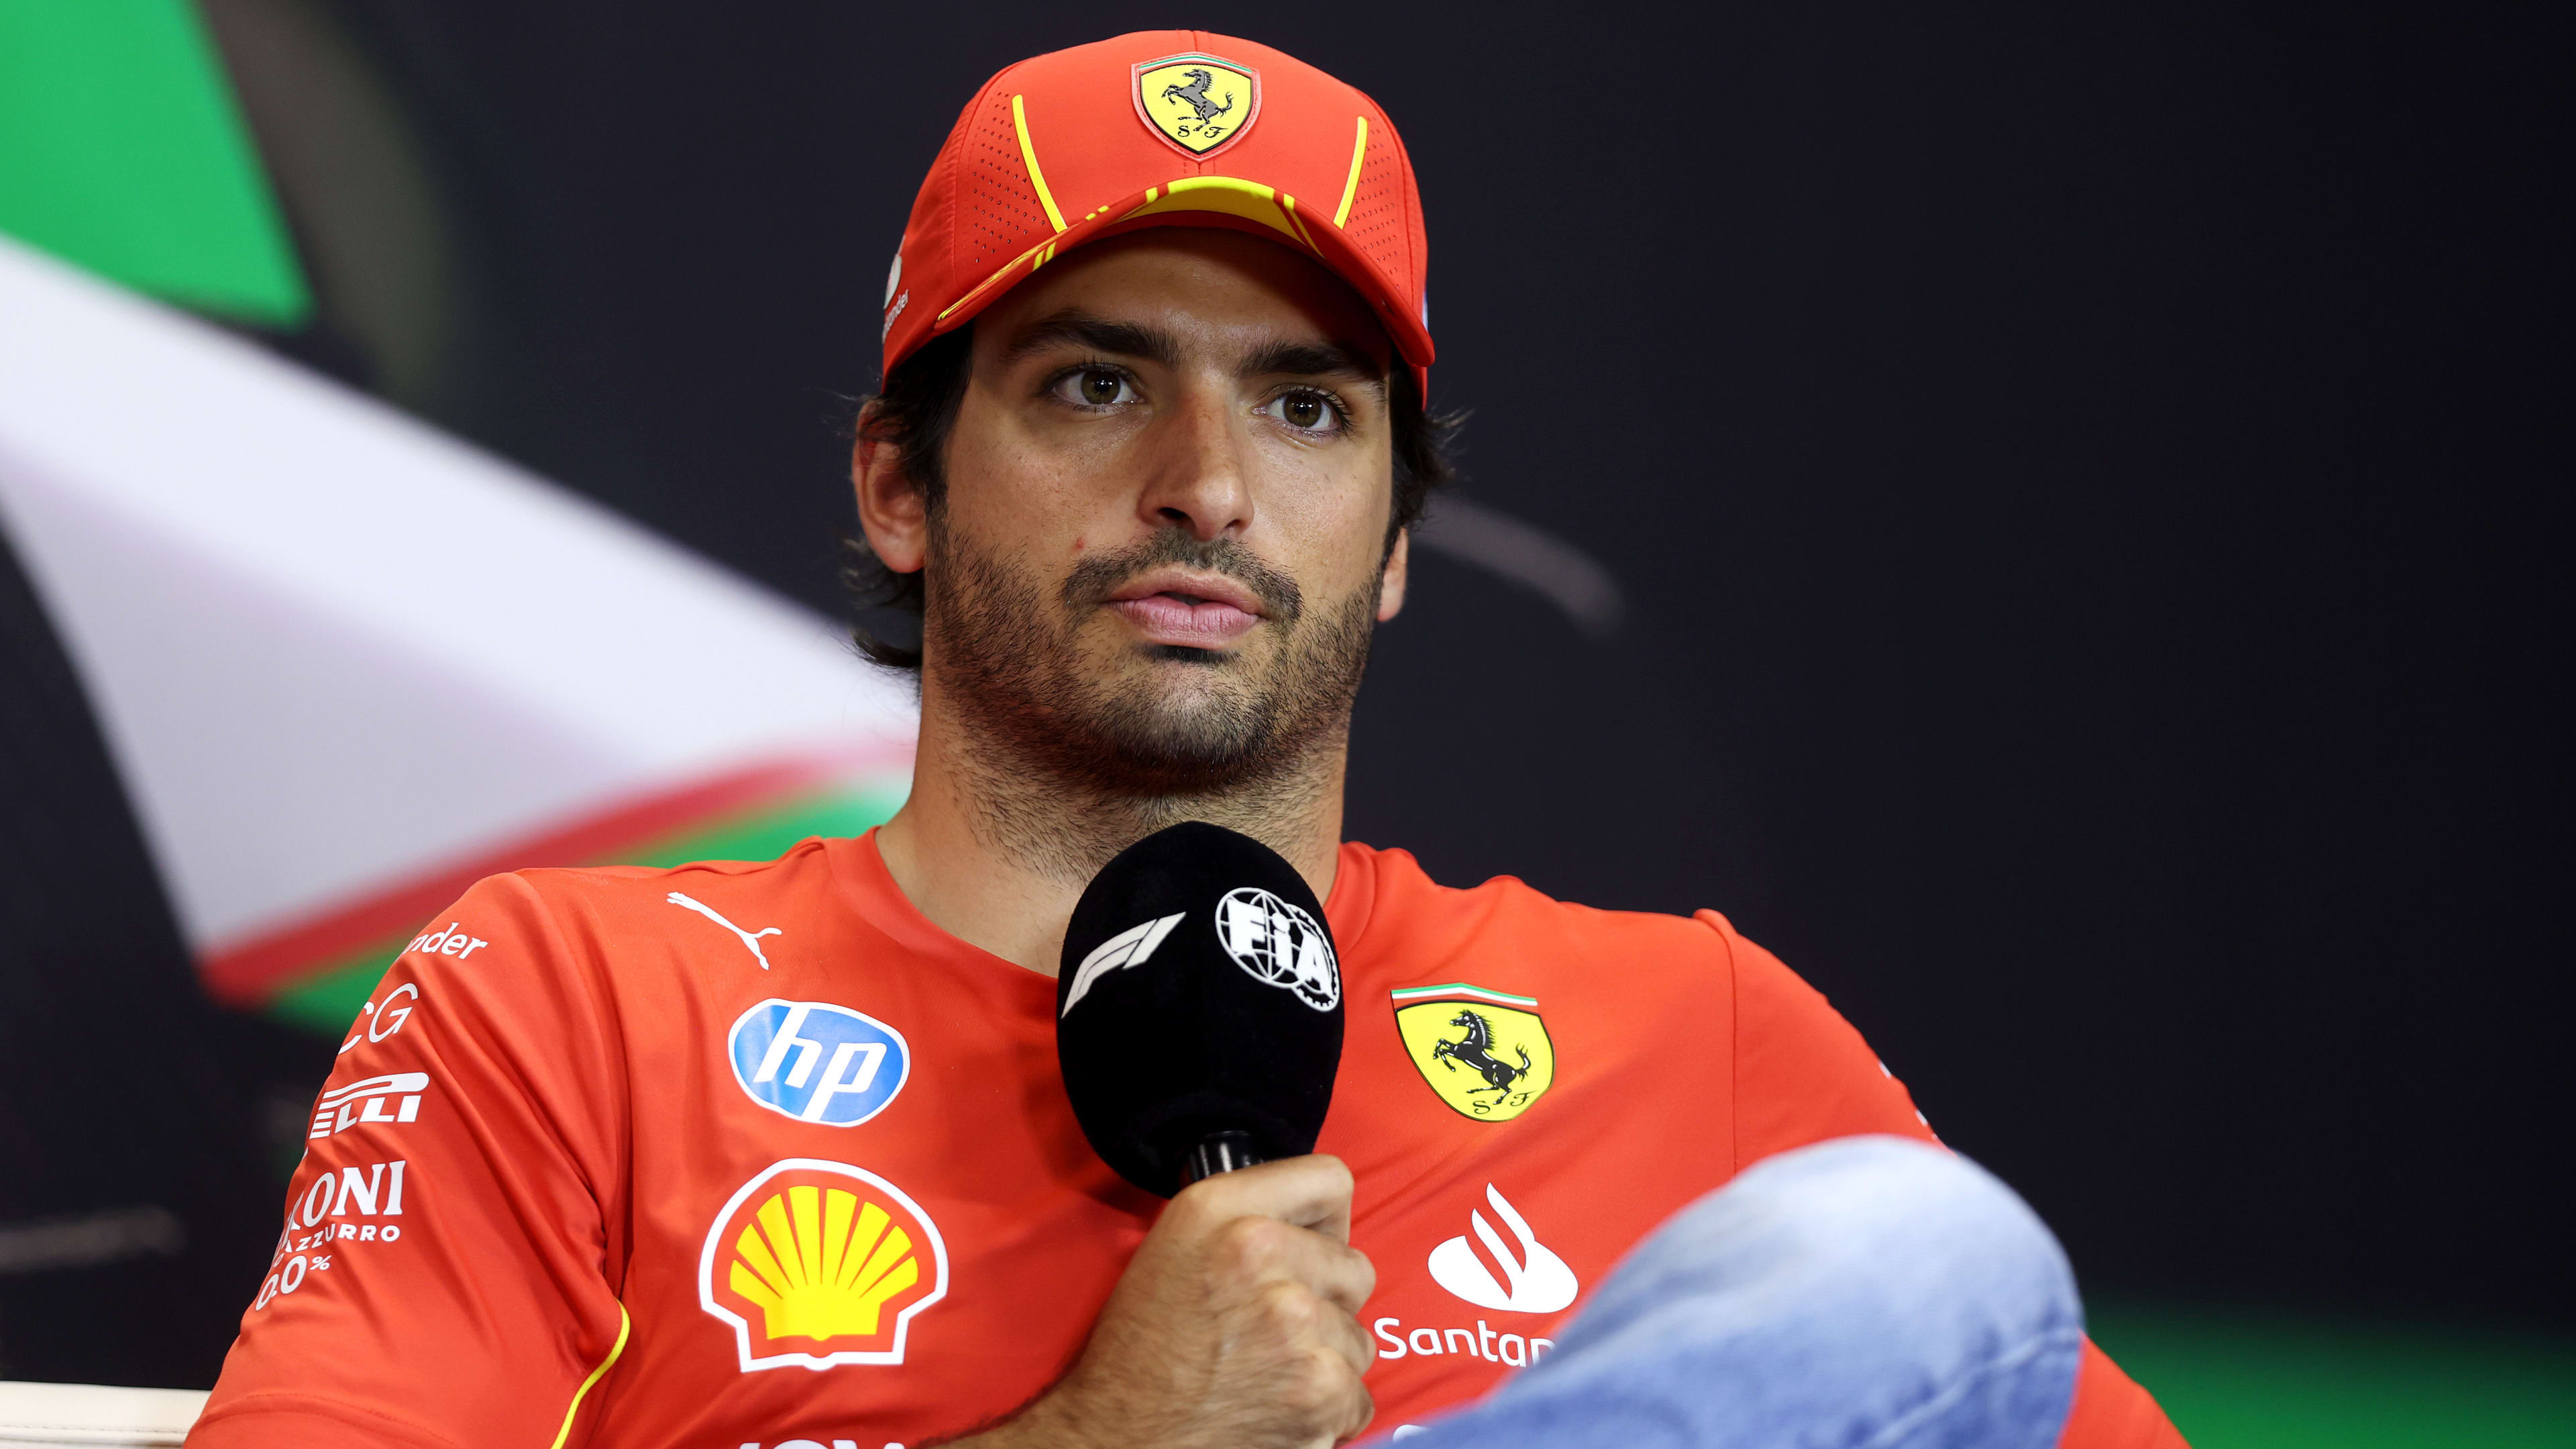 Sainz admits decision on his 2025 future is ‘not moving too quick’ as he assesses Ferrari’s chances in Imola